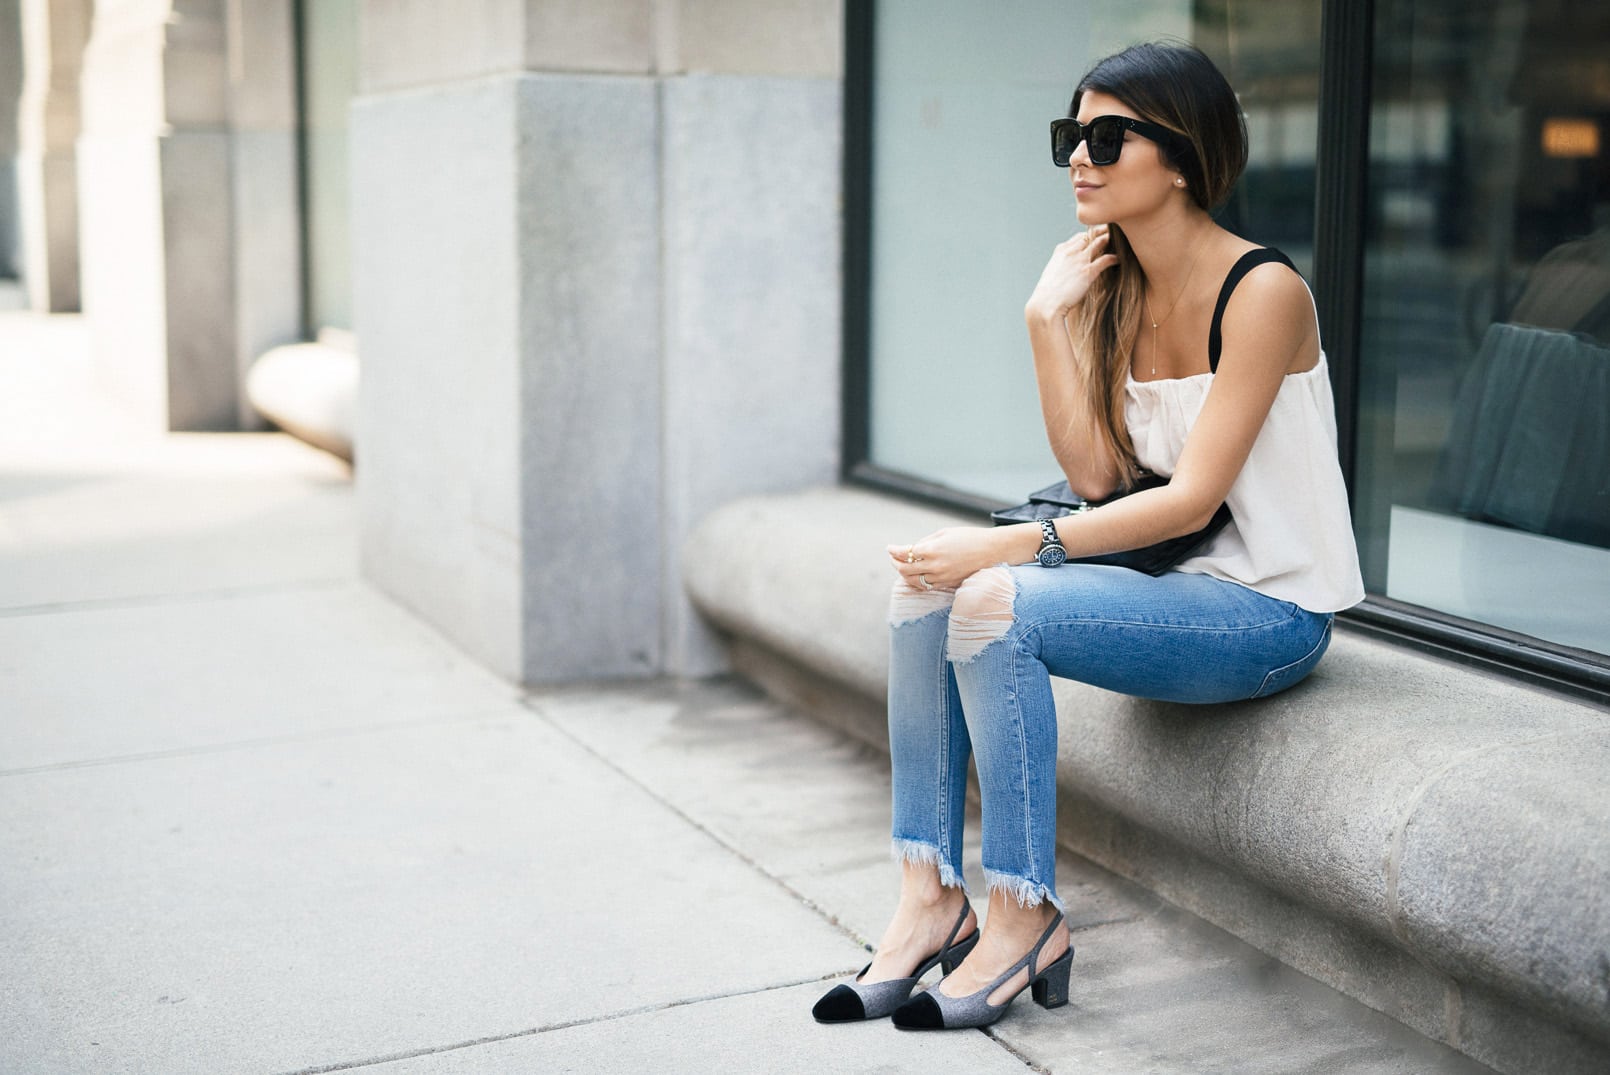 Weekend Casual Look | The Girl From Panama- Mango flowy top, cropped skinny jeans, the chanel slingback, chanel french riviera flap, celine tilda sunglasses.